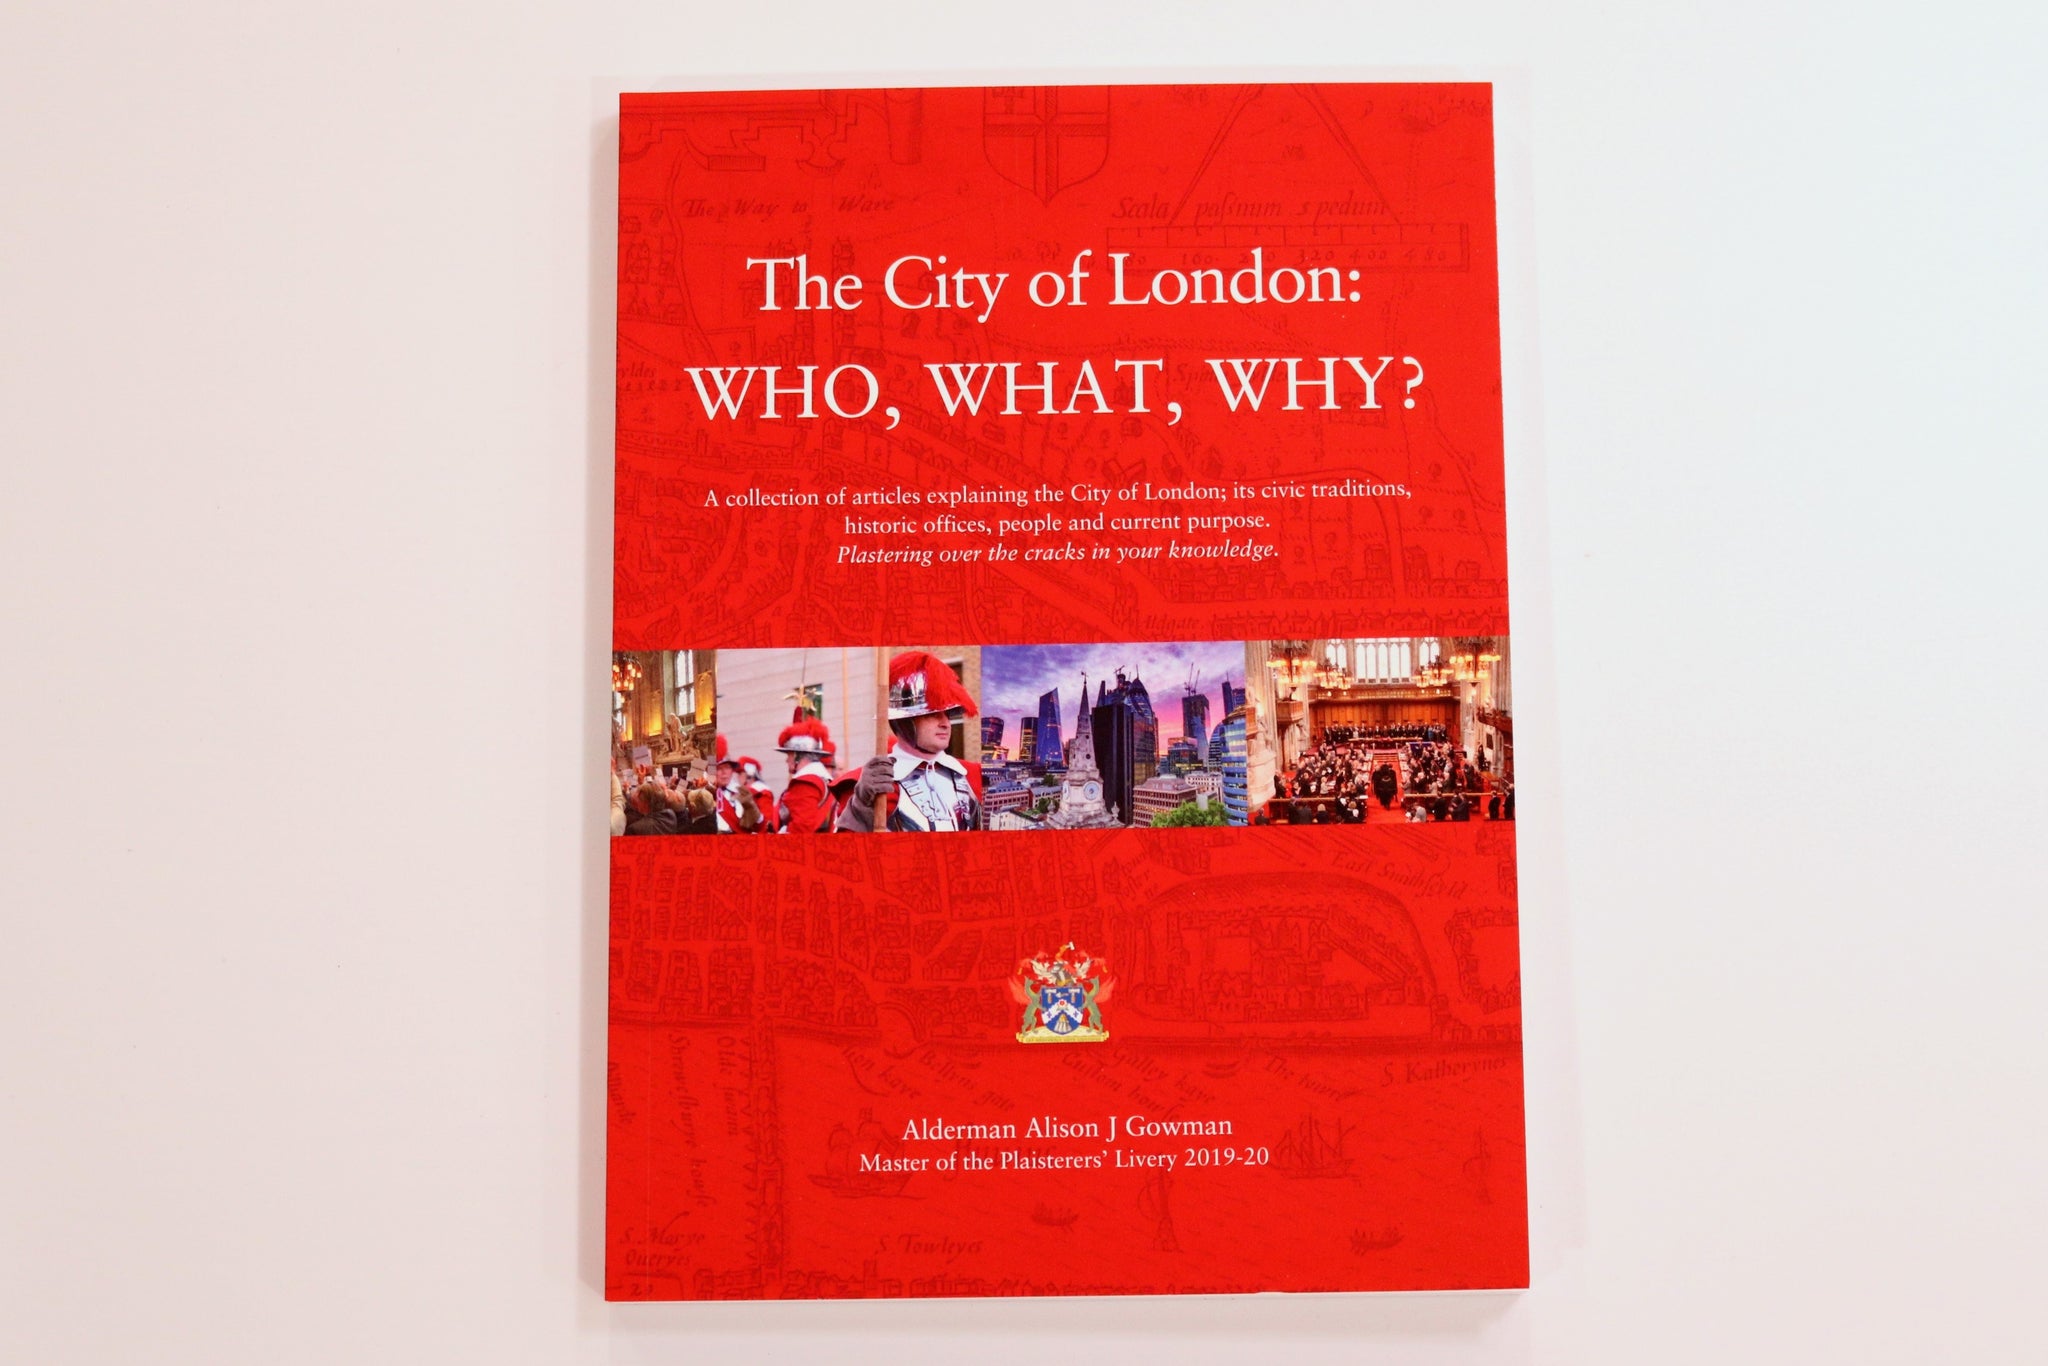 The City of London: Who, What, Why?